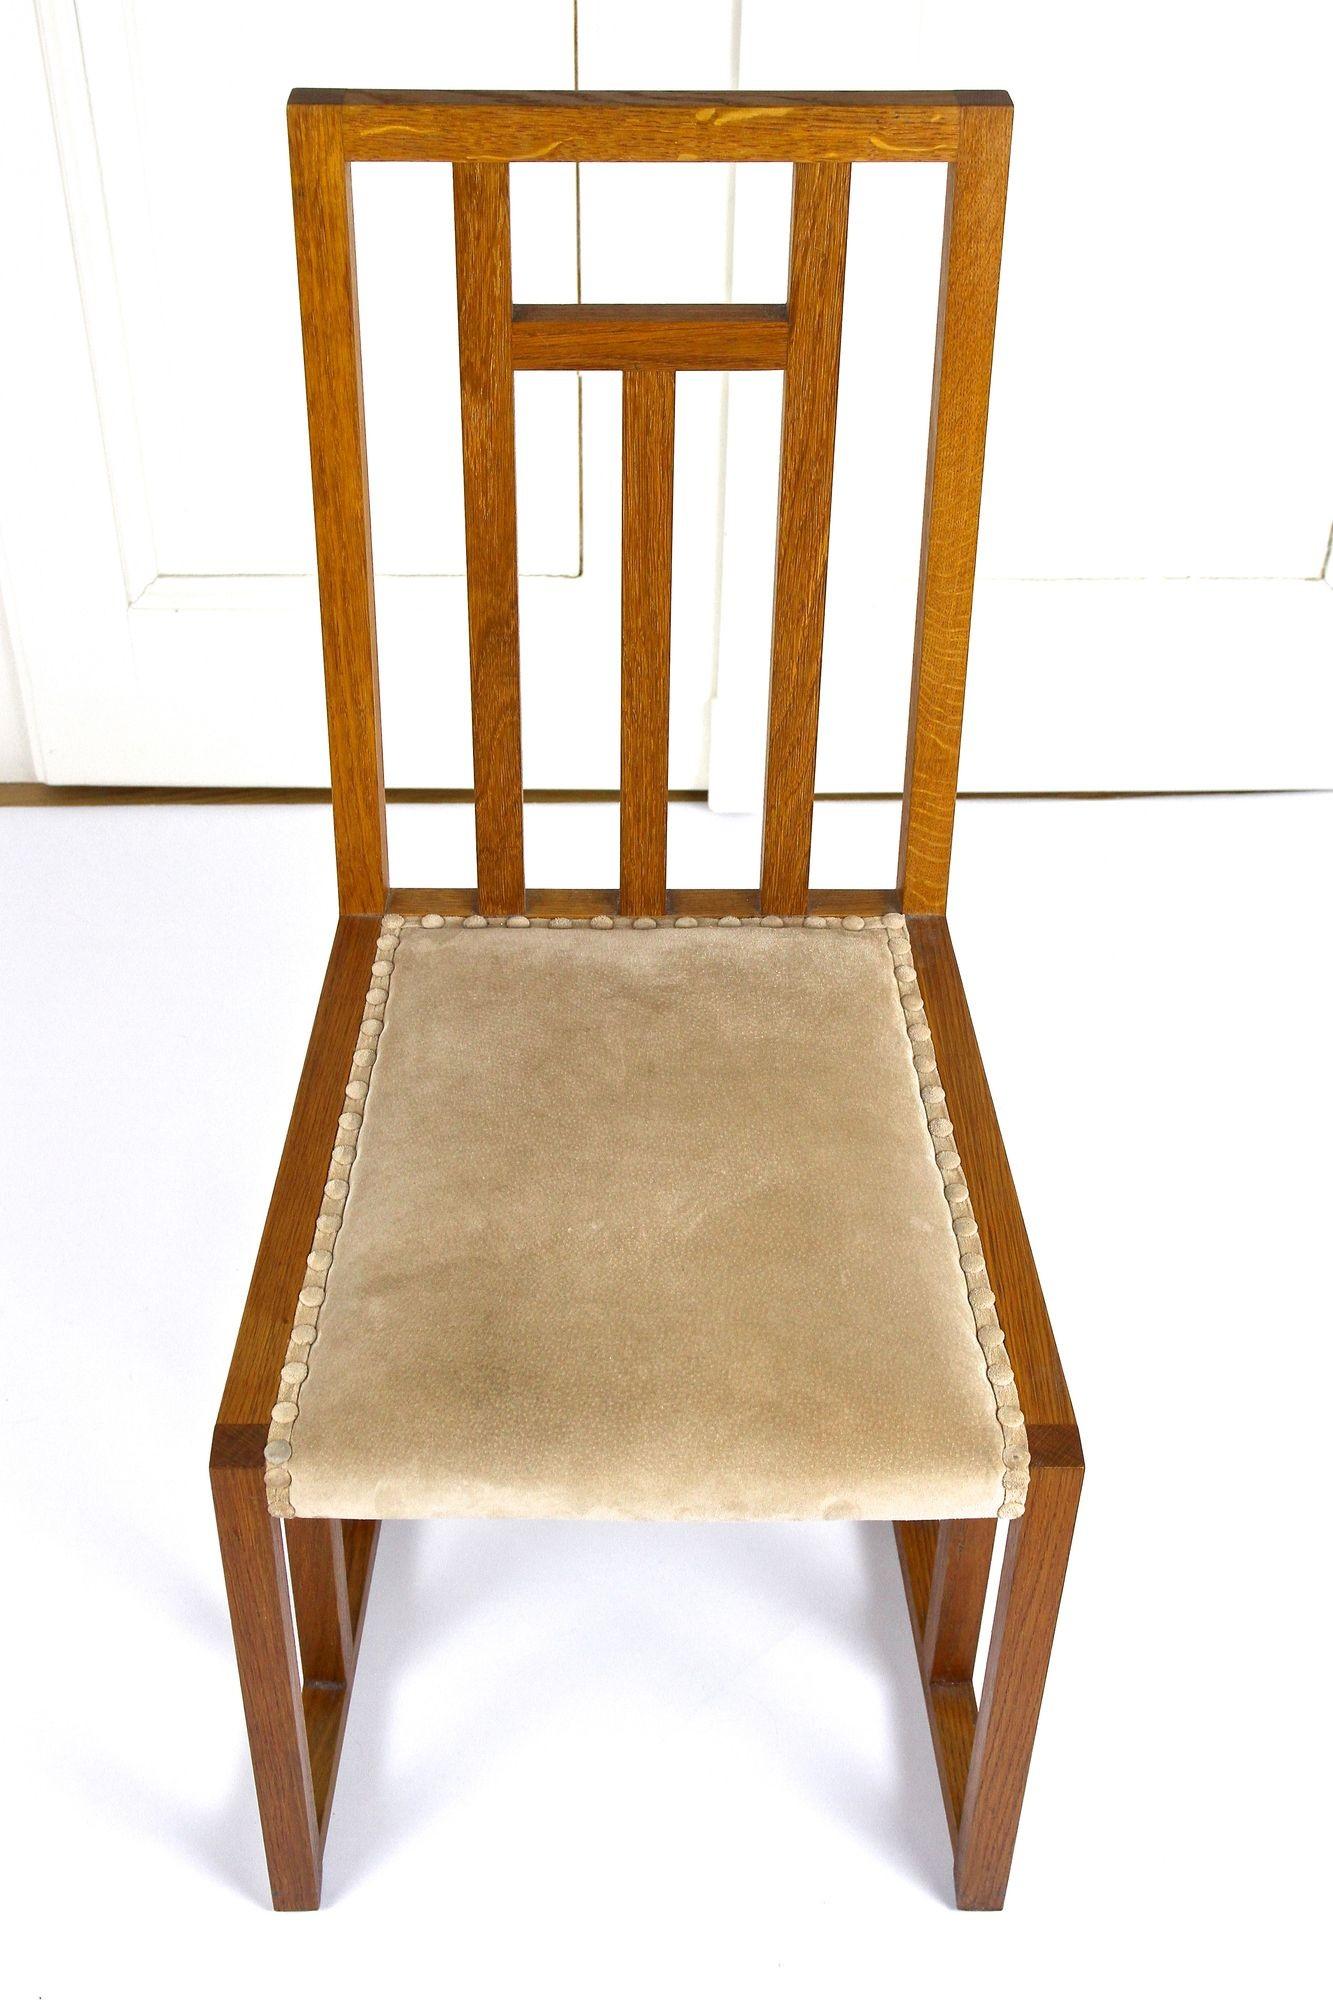 Oiled Set Of 6 Art Nouveau Dining Chairs by Josef Hoffmann, 20th Century, AT ca. 1901 For Sale